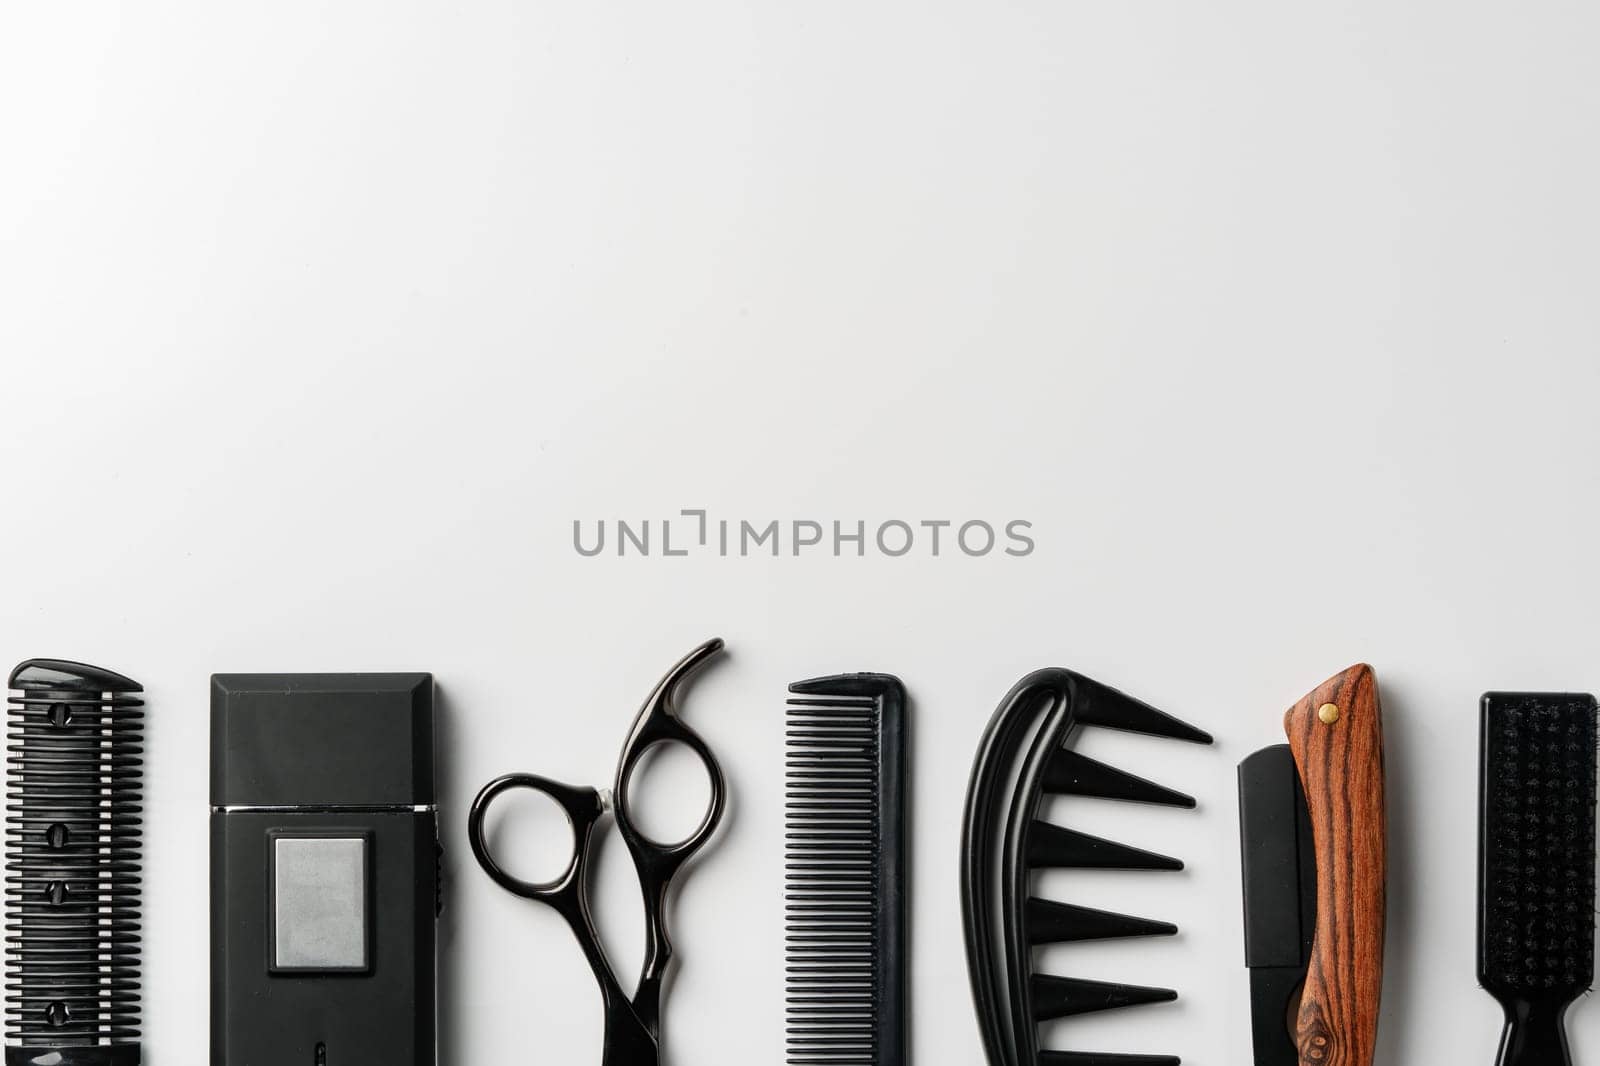 Set of barber tools for haircut on gray background flat lay by Fabrikasimf